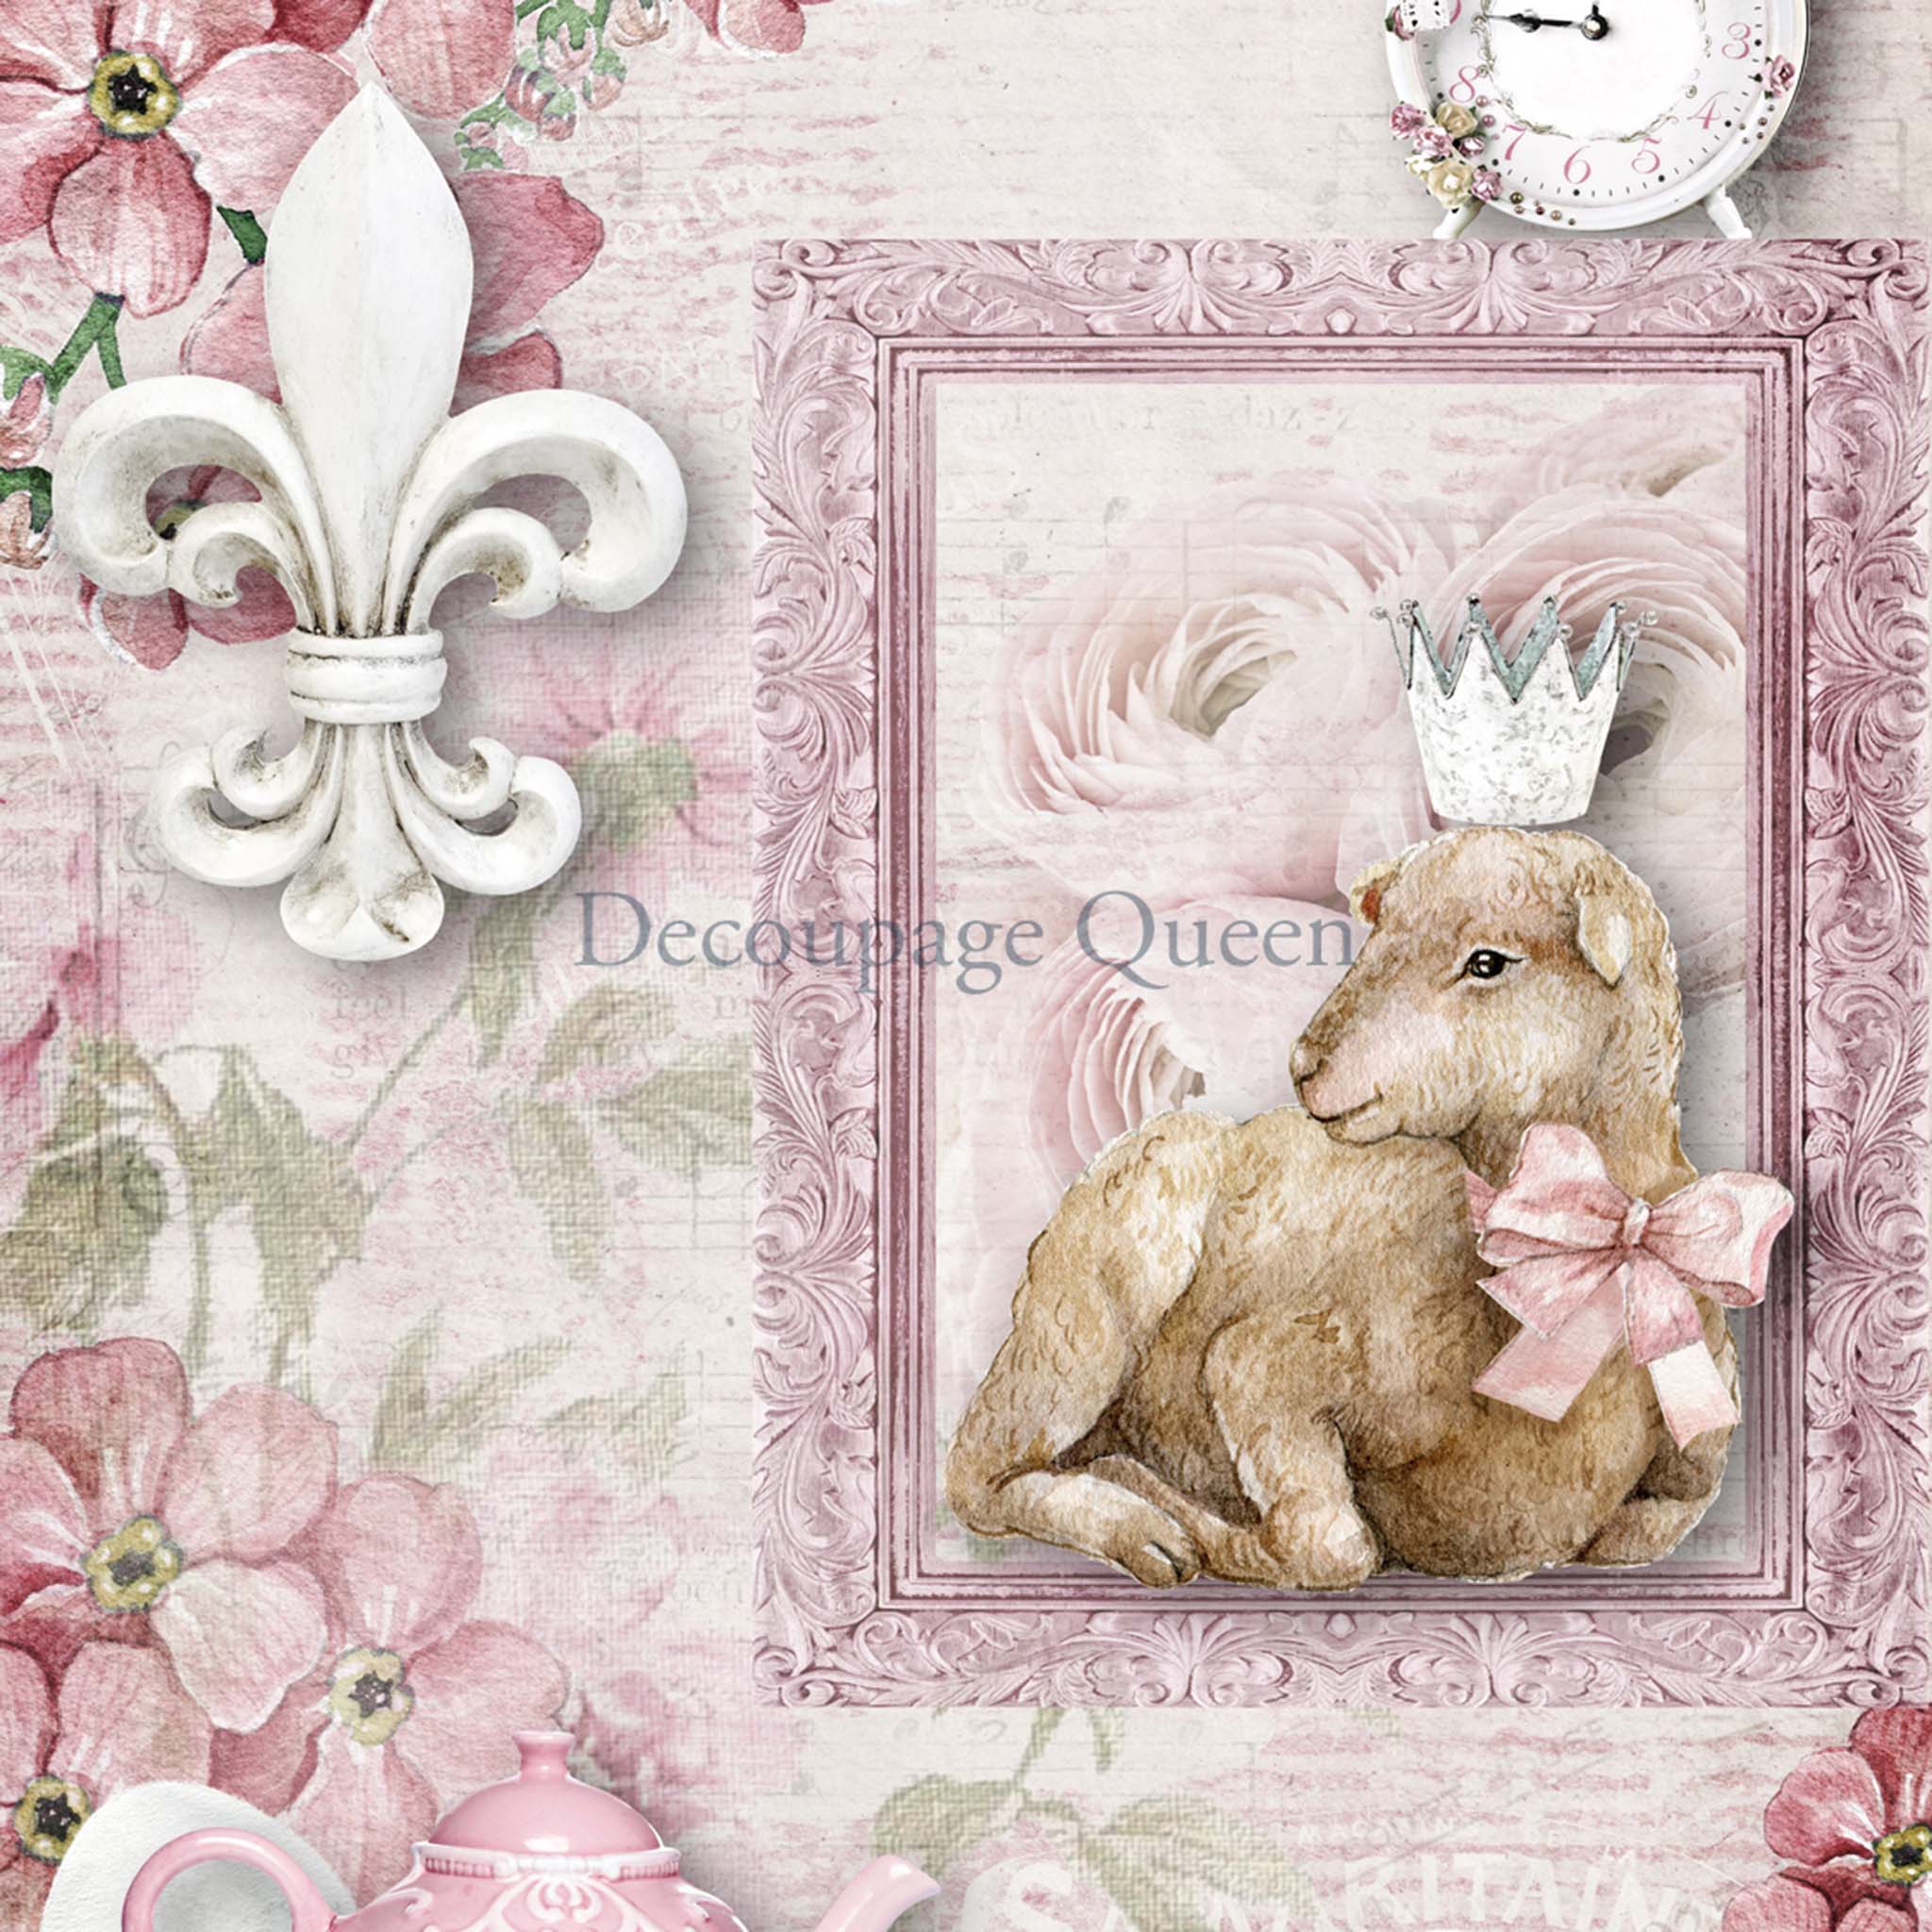 Close-up of an A3 rice paper design that features a pale pink background and adorable lamb with a crown and features fleur de lis, a clock, and a tea set with pink flowers.